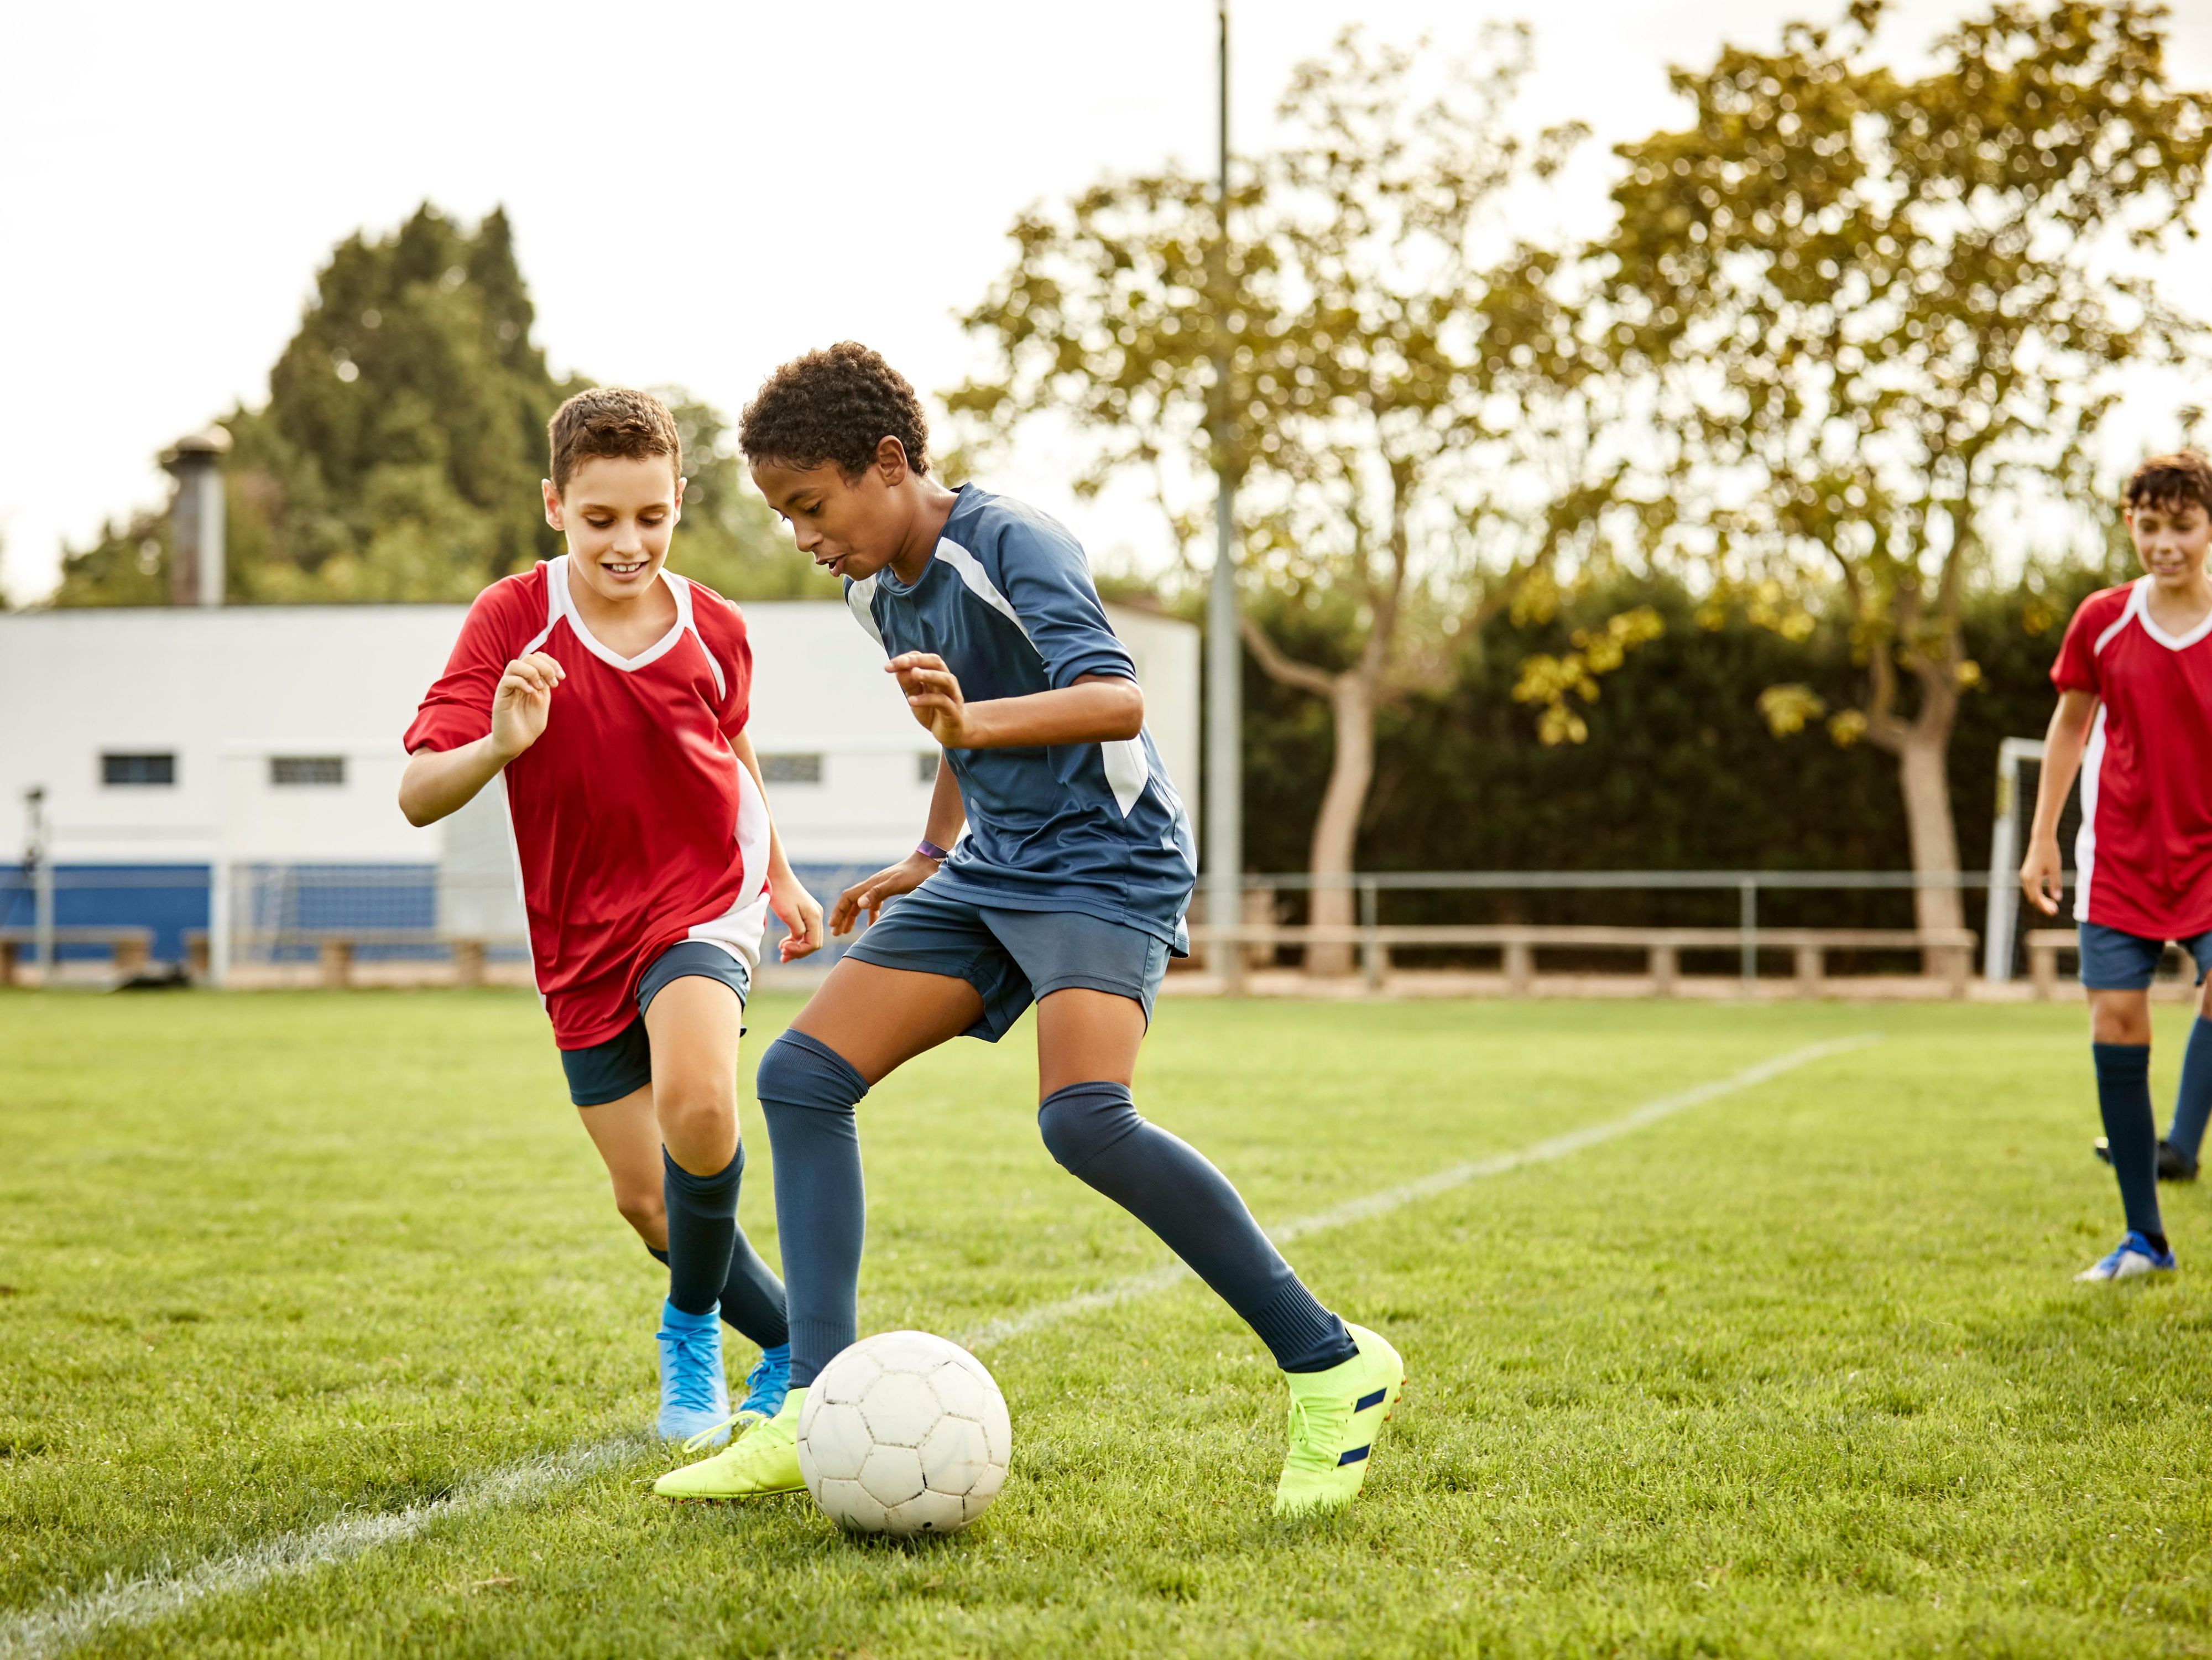 Fall Youth Sports Tournaments